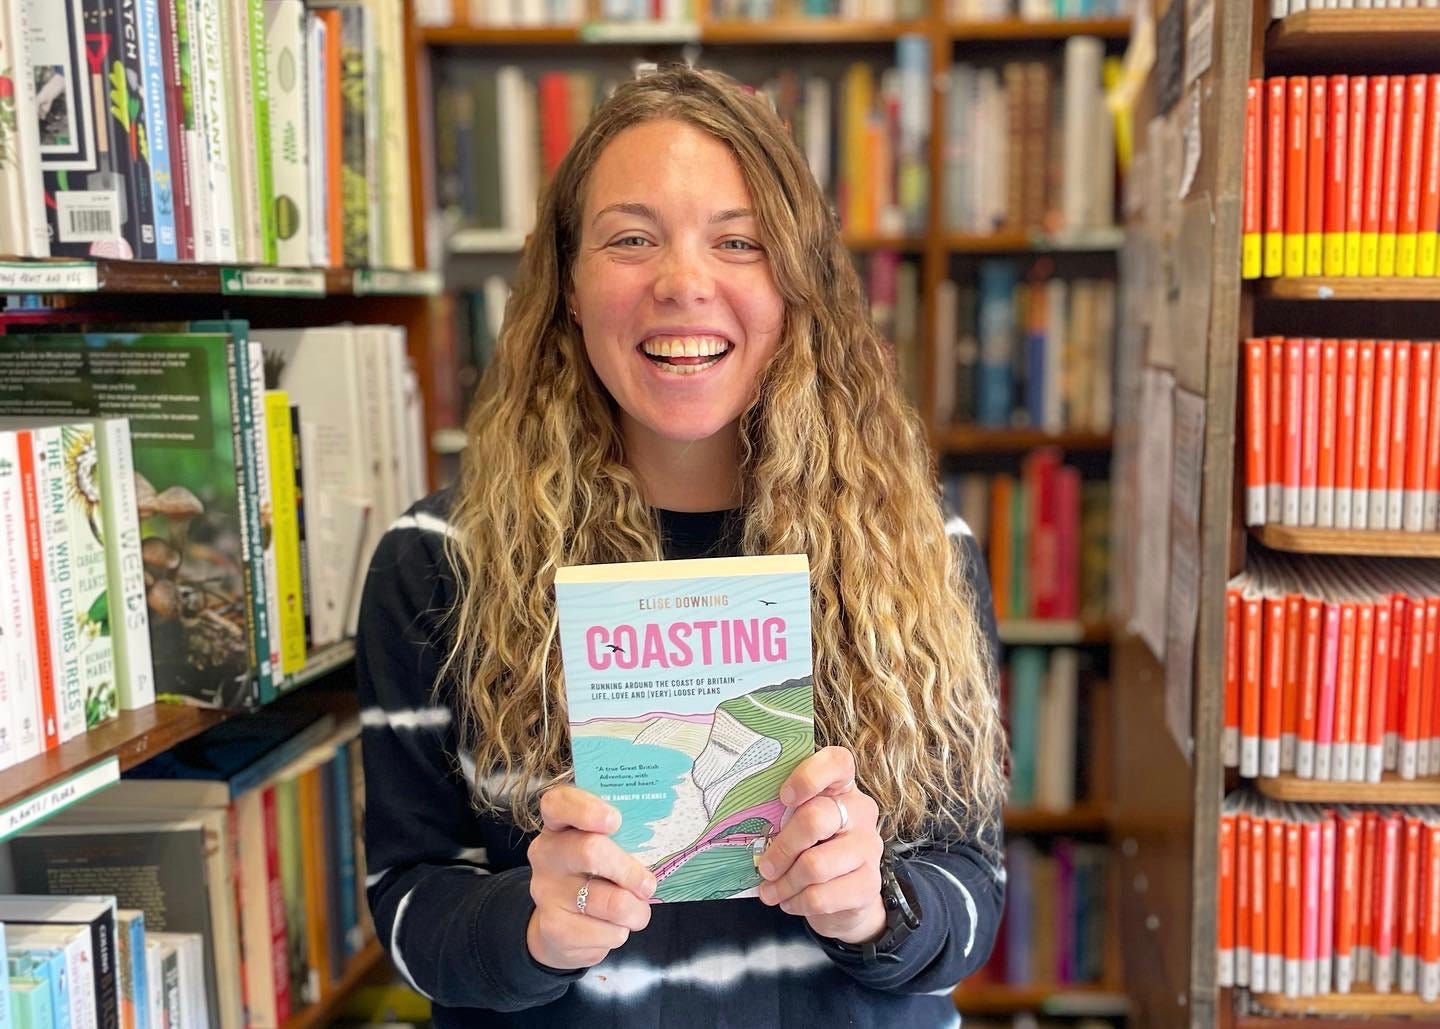 Grab some summer reading - Coasting by Elise Downing